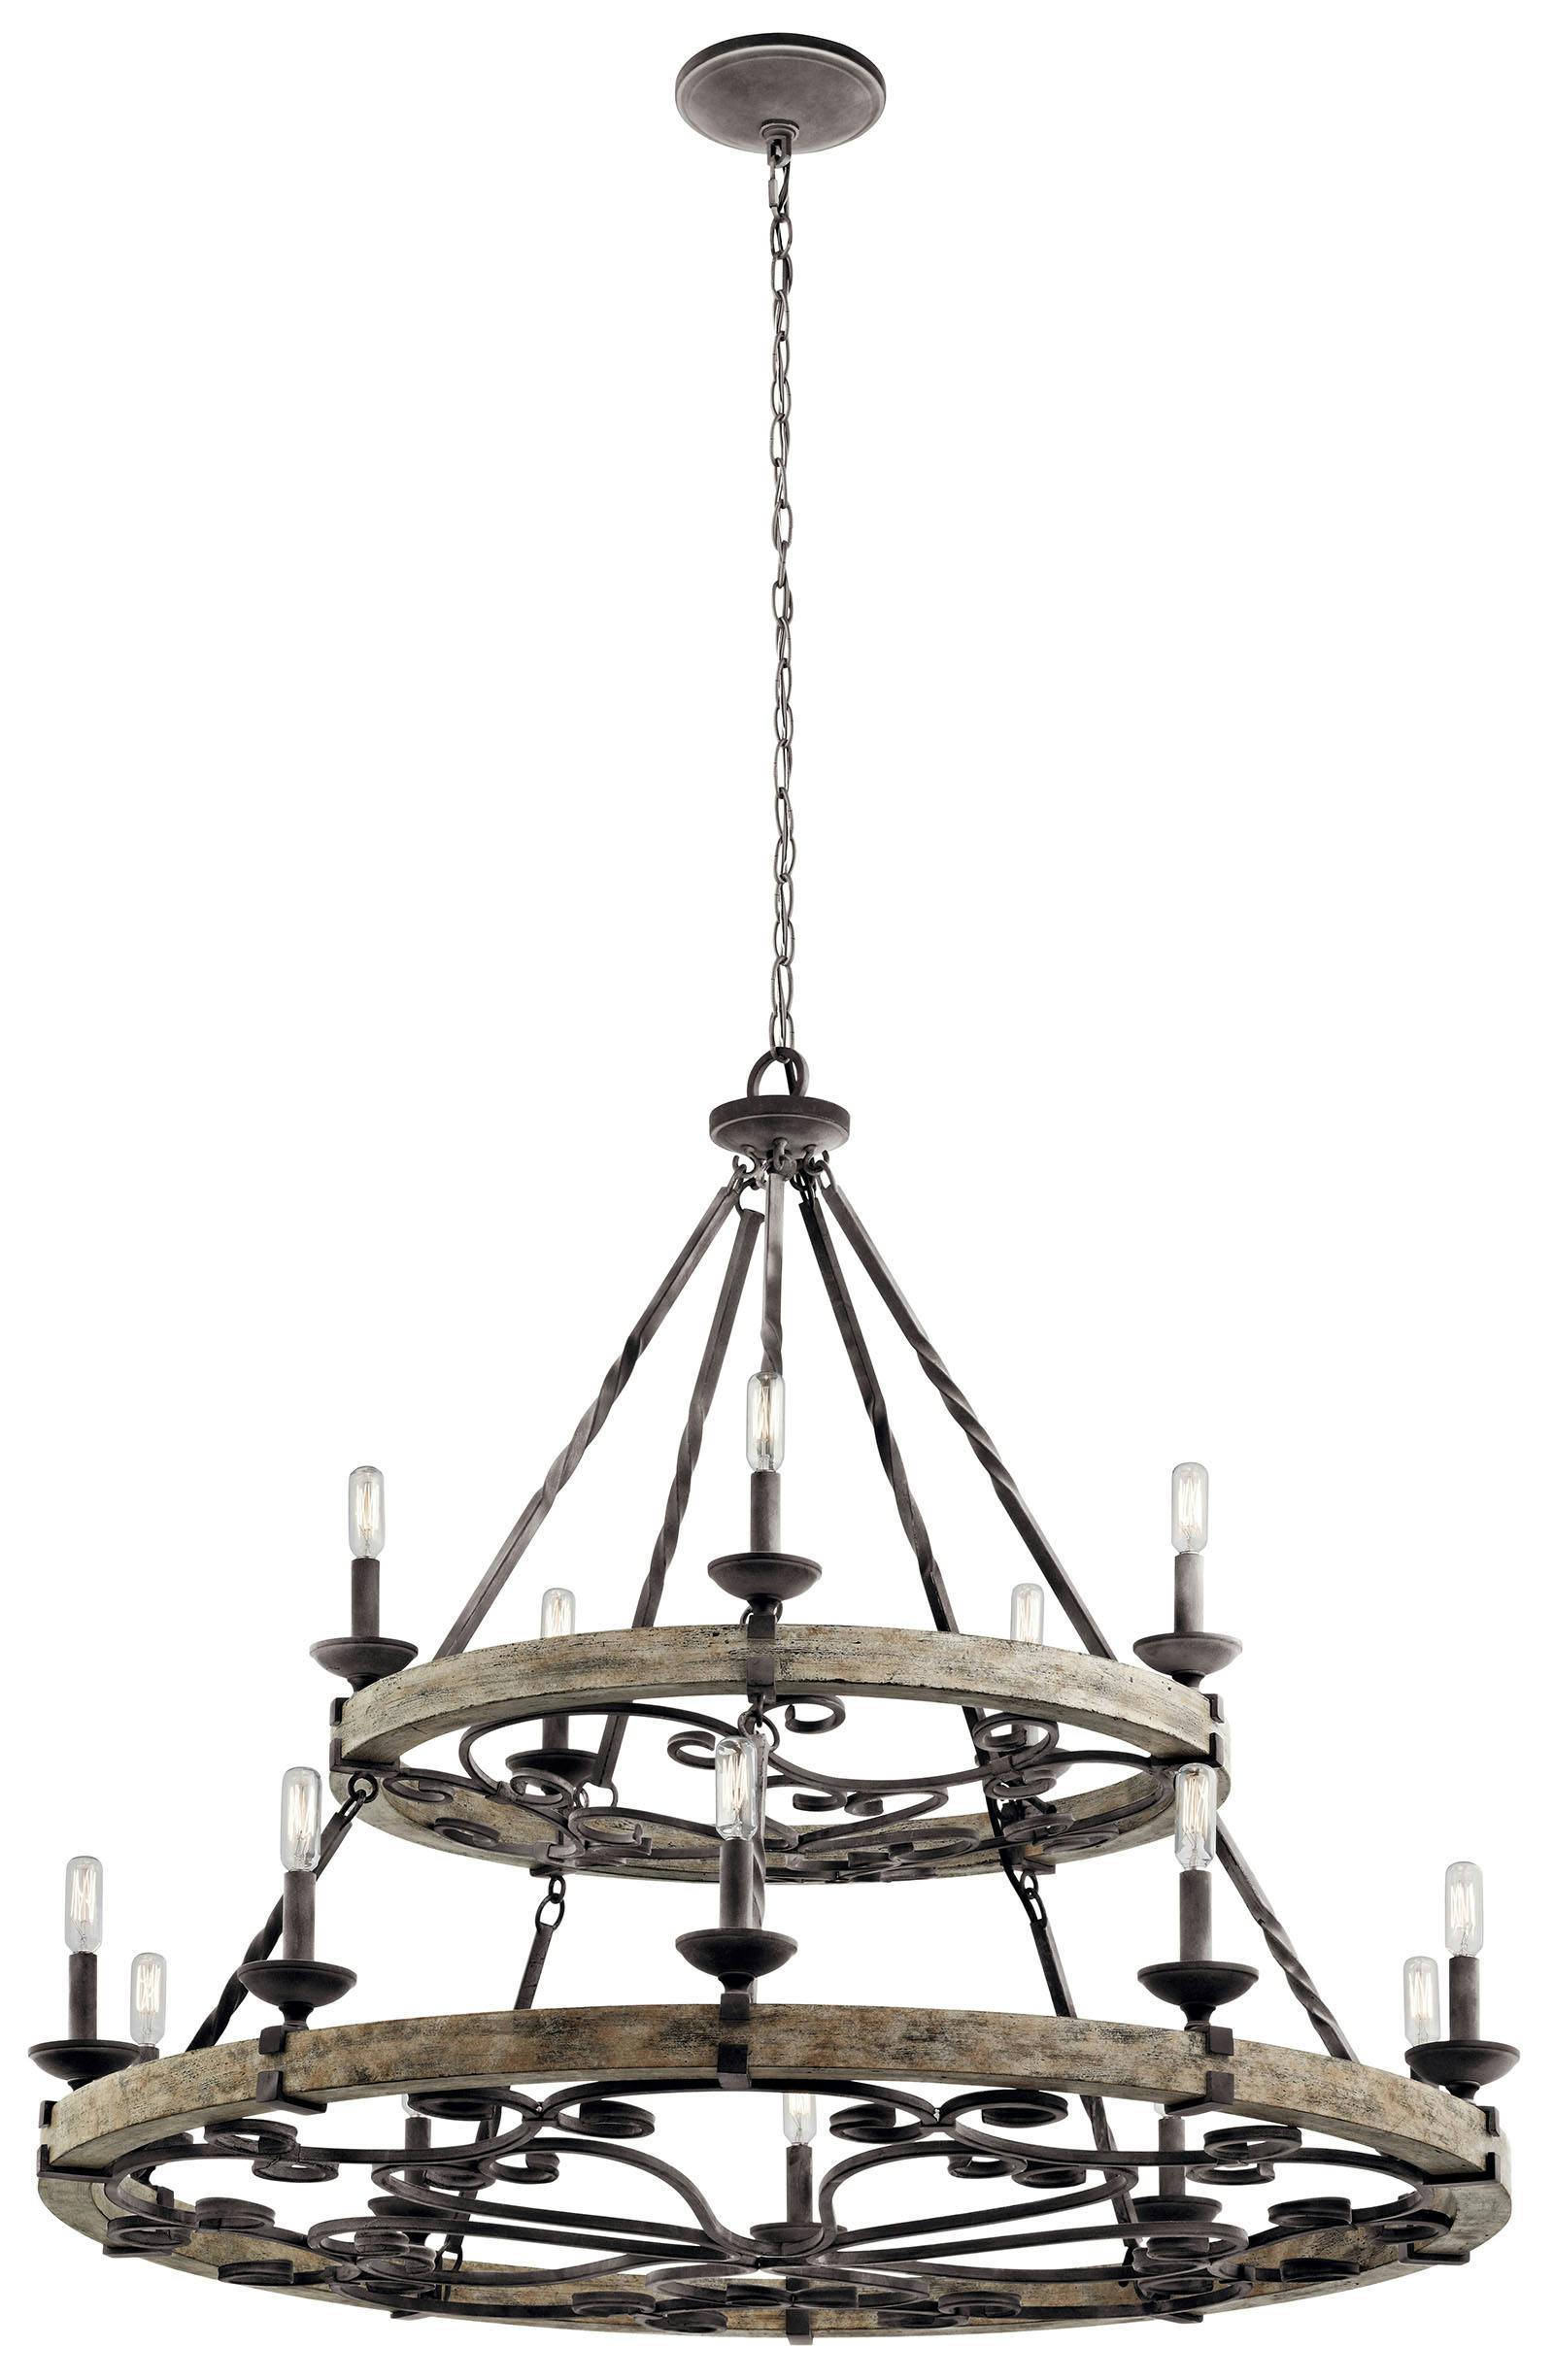 Taulbee 15 Light Chandelier Zinc on a white background